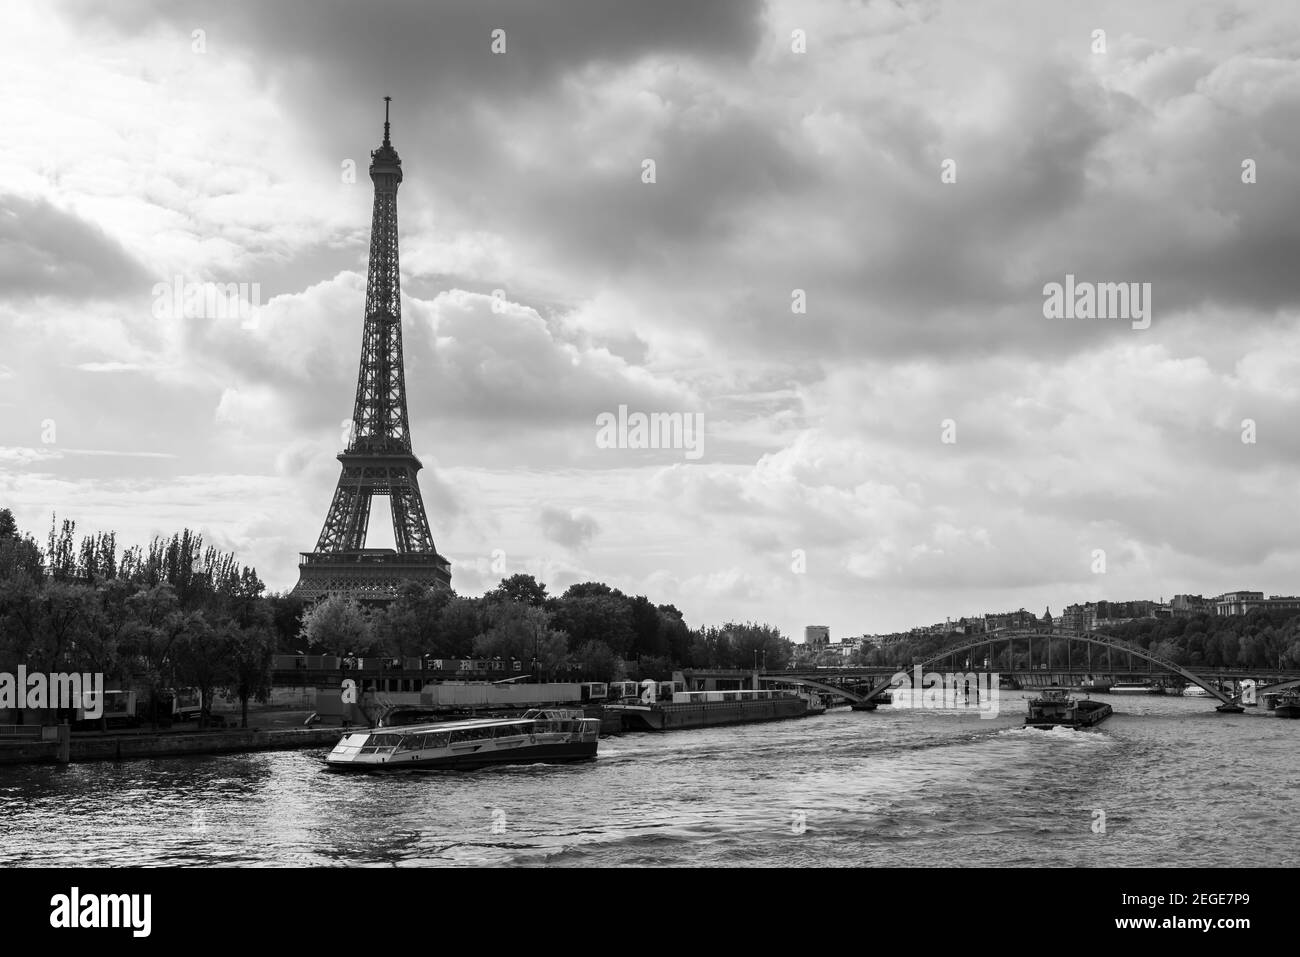 Traffic on the Seine and the Eiffel Tower in the background, in black and white, in Paris, France Stock Photo